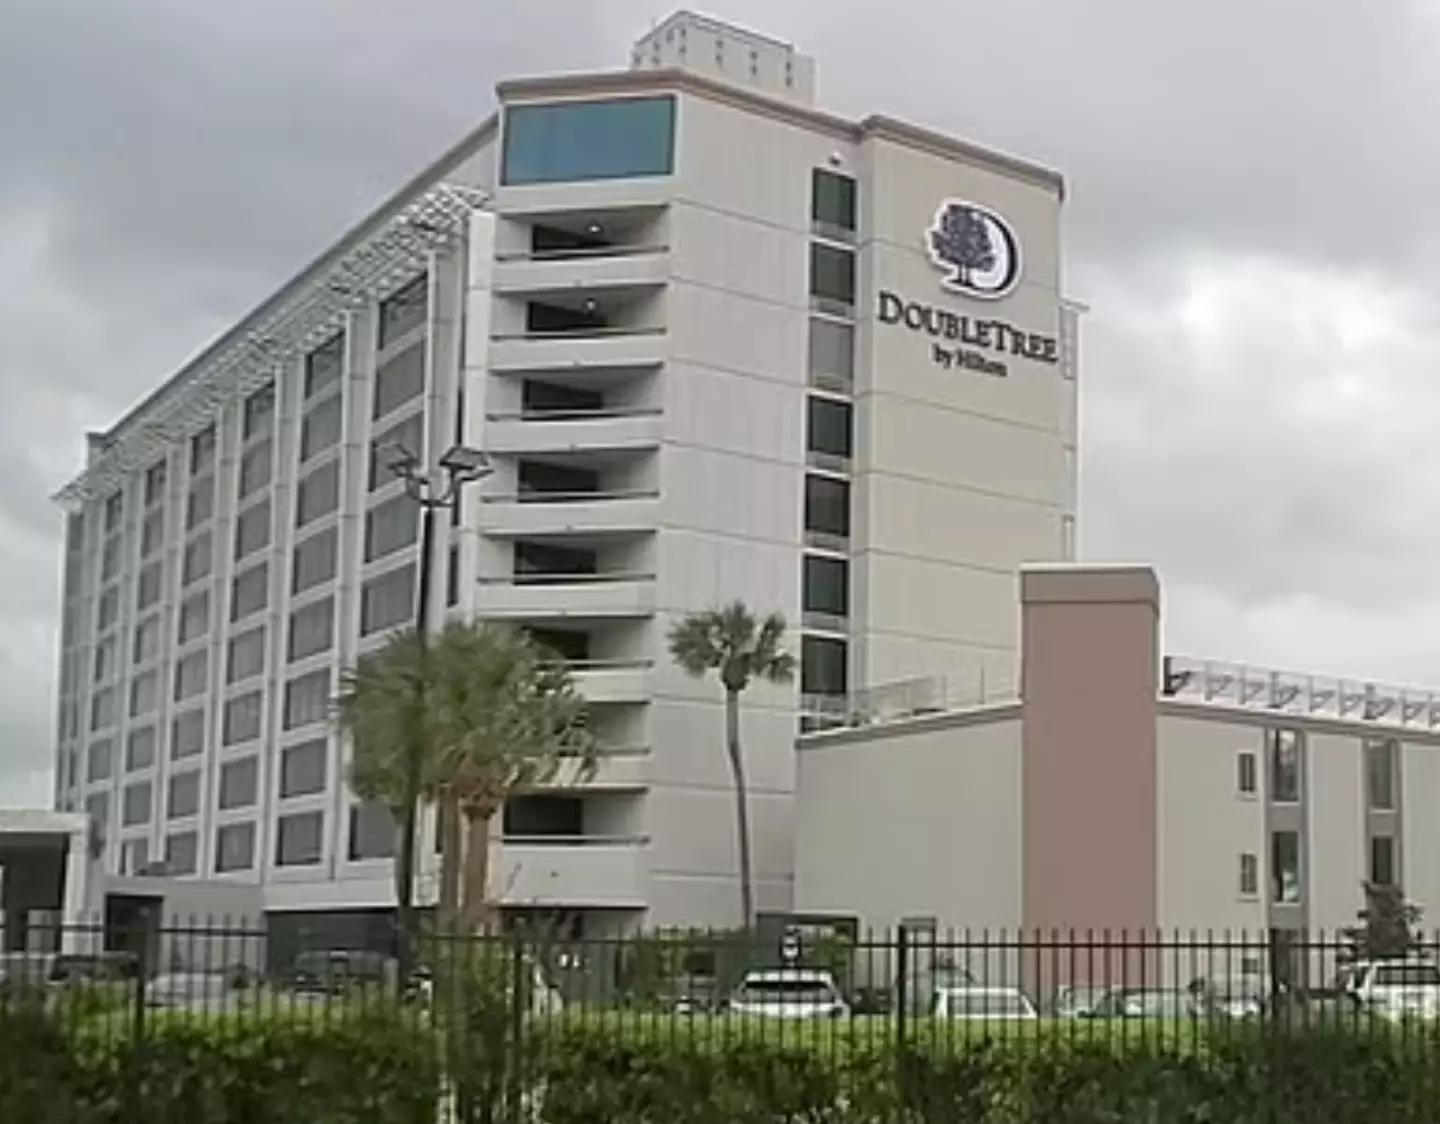 The tragic incident happened at the DoubleTree by Hilton in Houston.